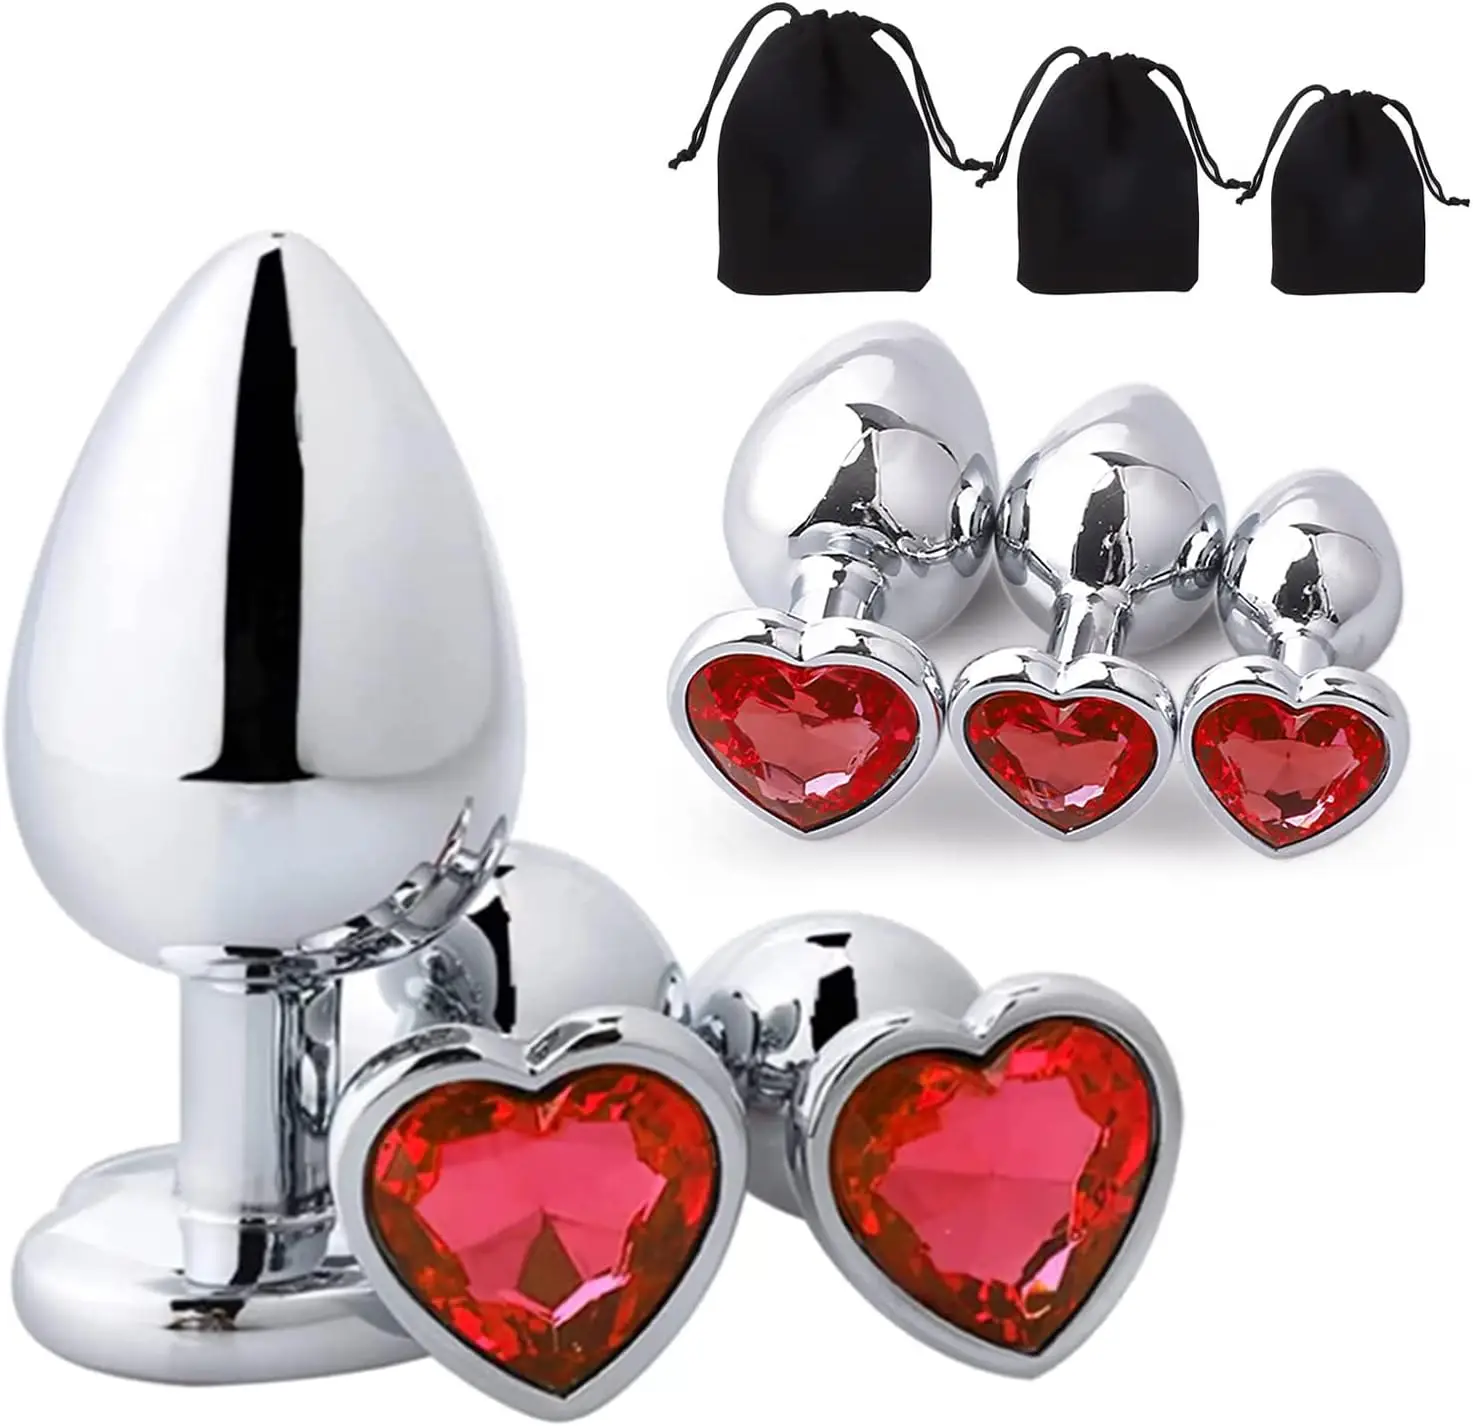 

Heart Butt Plug Set Metal Anal Plug - 3 Pcs Buttplug, But Plug, Sexual Stimulation Device Anal Sex Toy Butt Toys Anal Toys